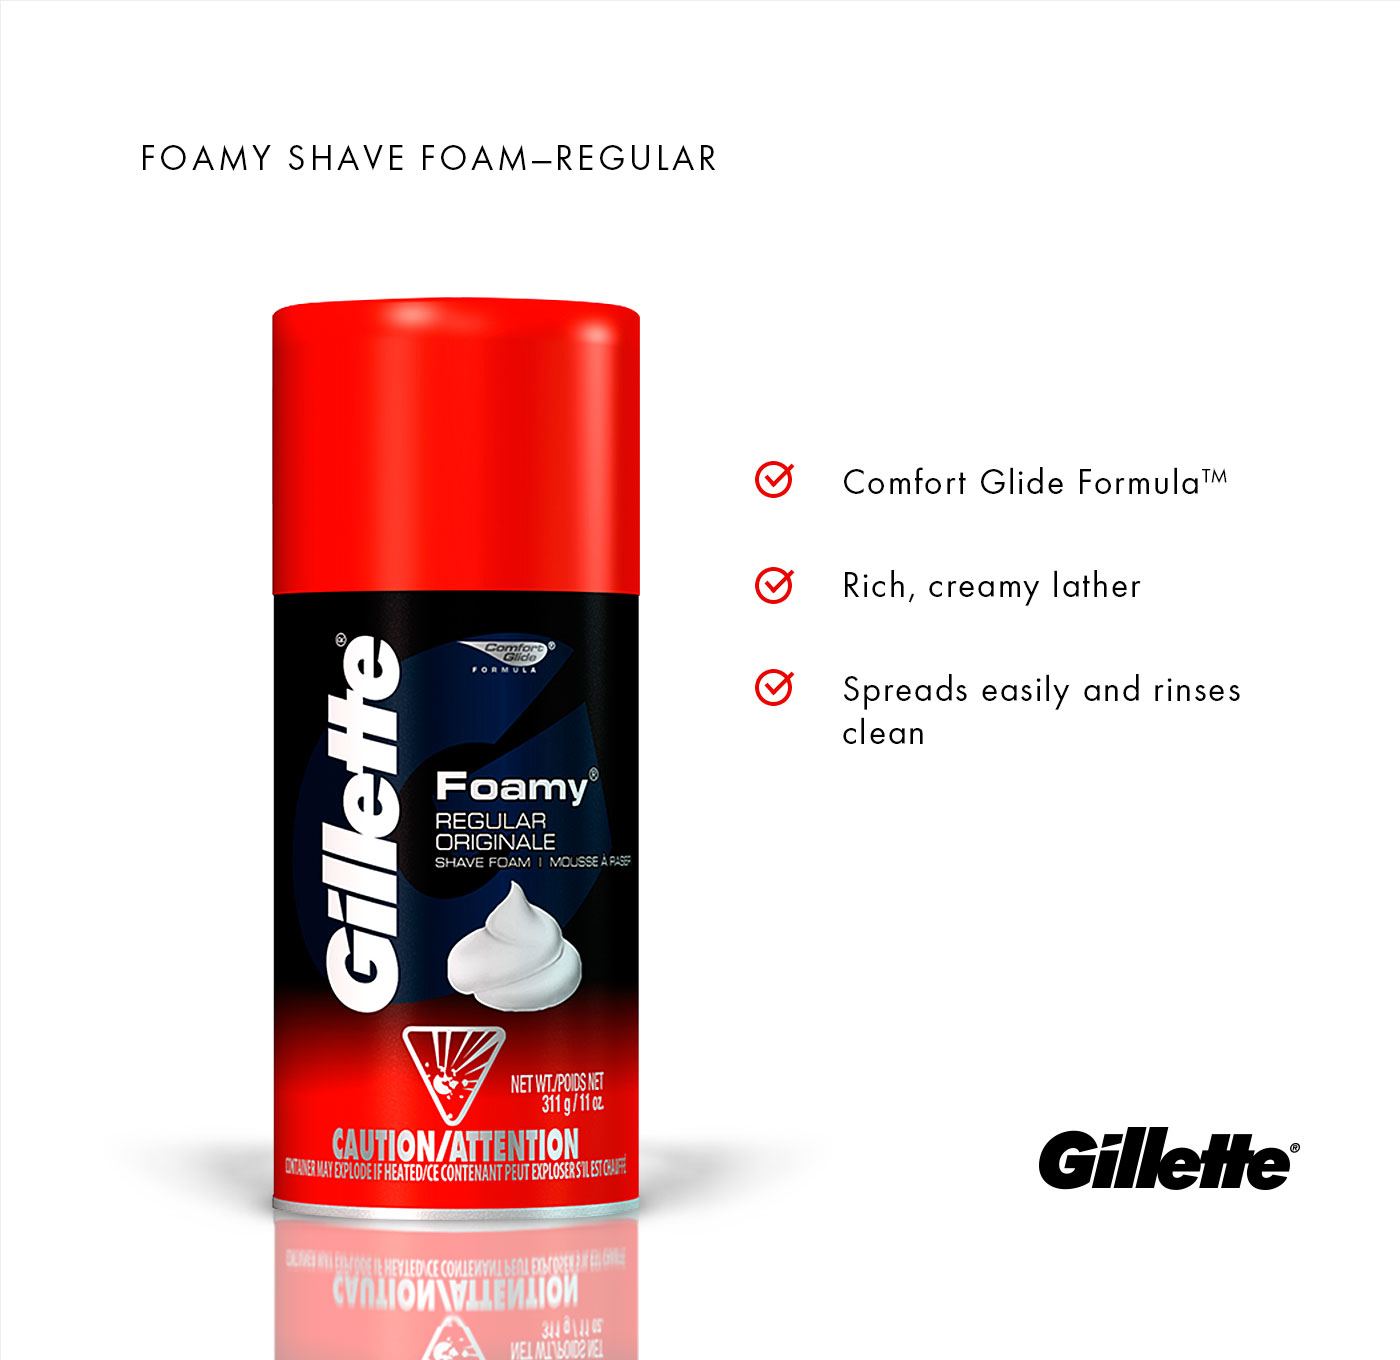 Shaving and Personal Care Products Logo - Classic Shaving Foam